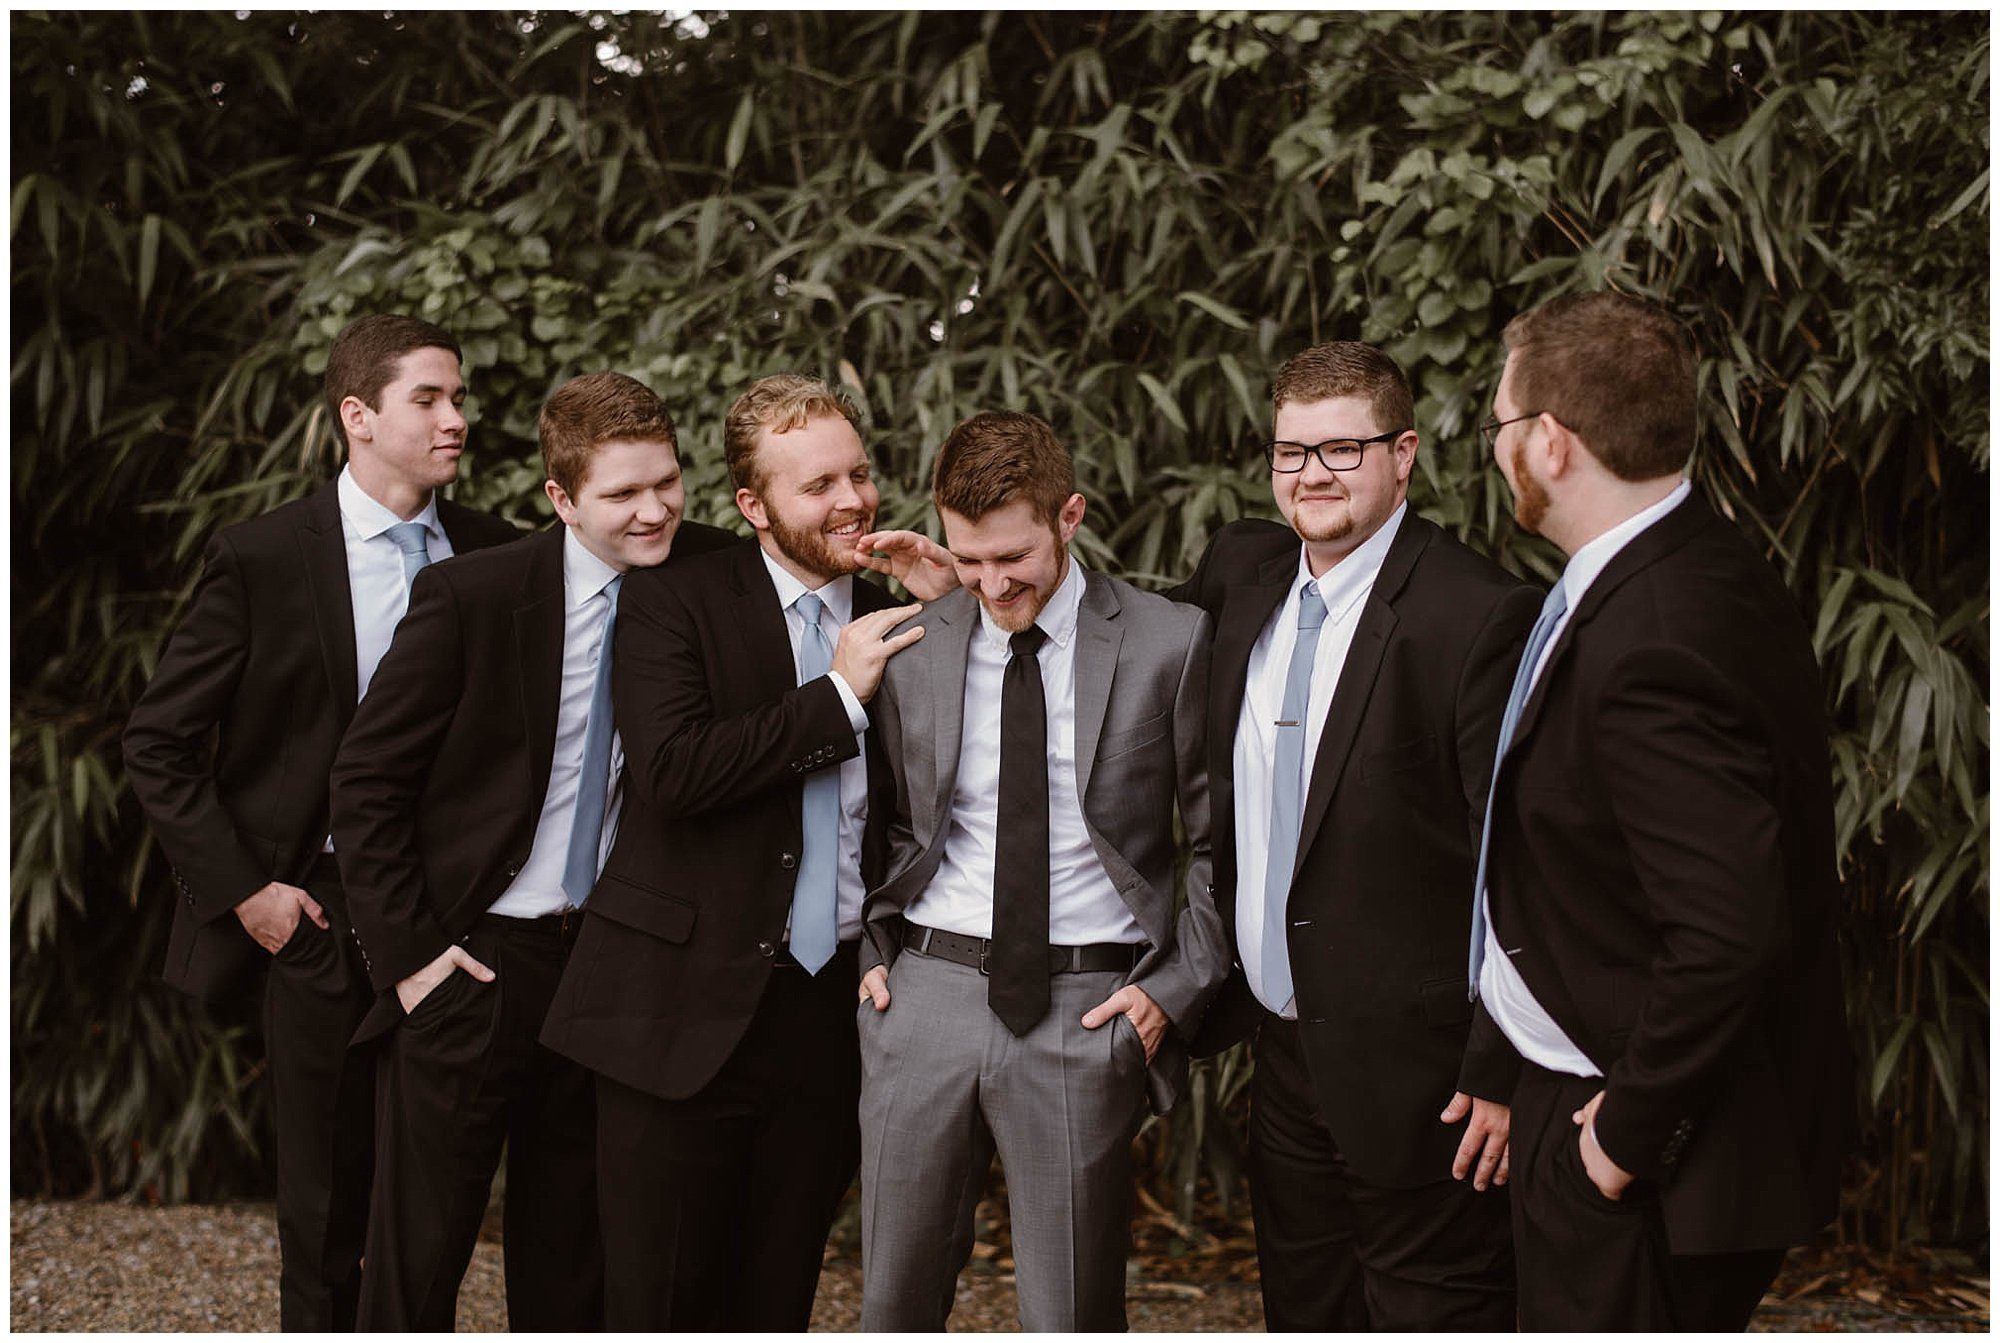 Groom and Groomsmen Photos at Crescent Bend House Wedding Knoxville